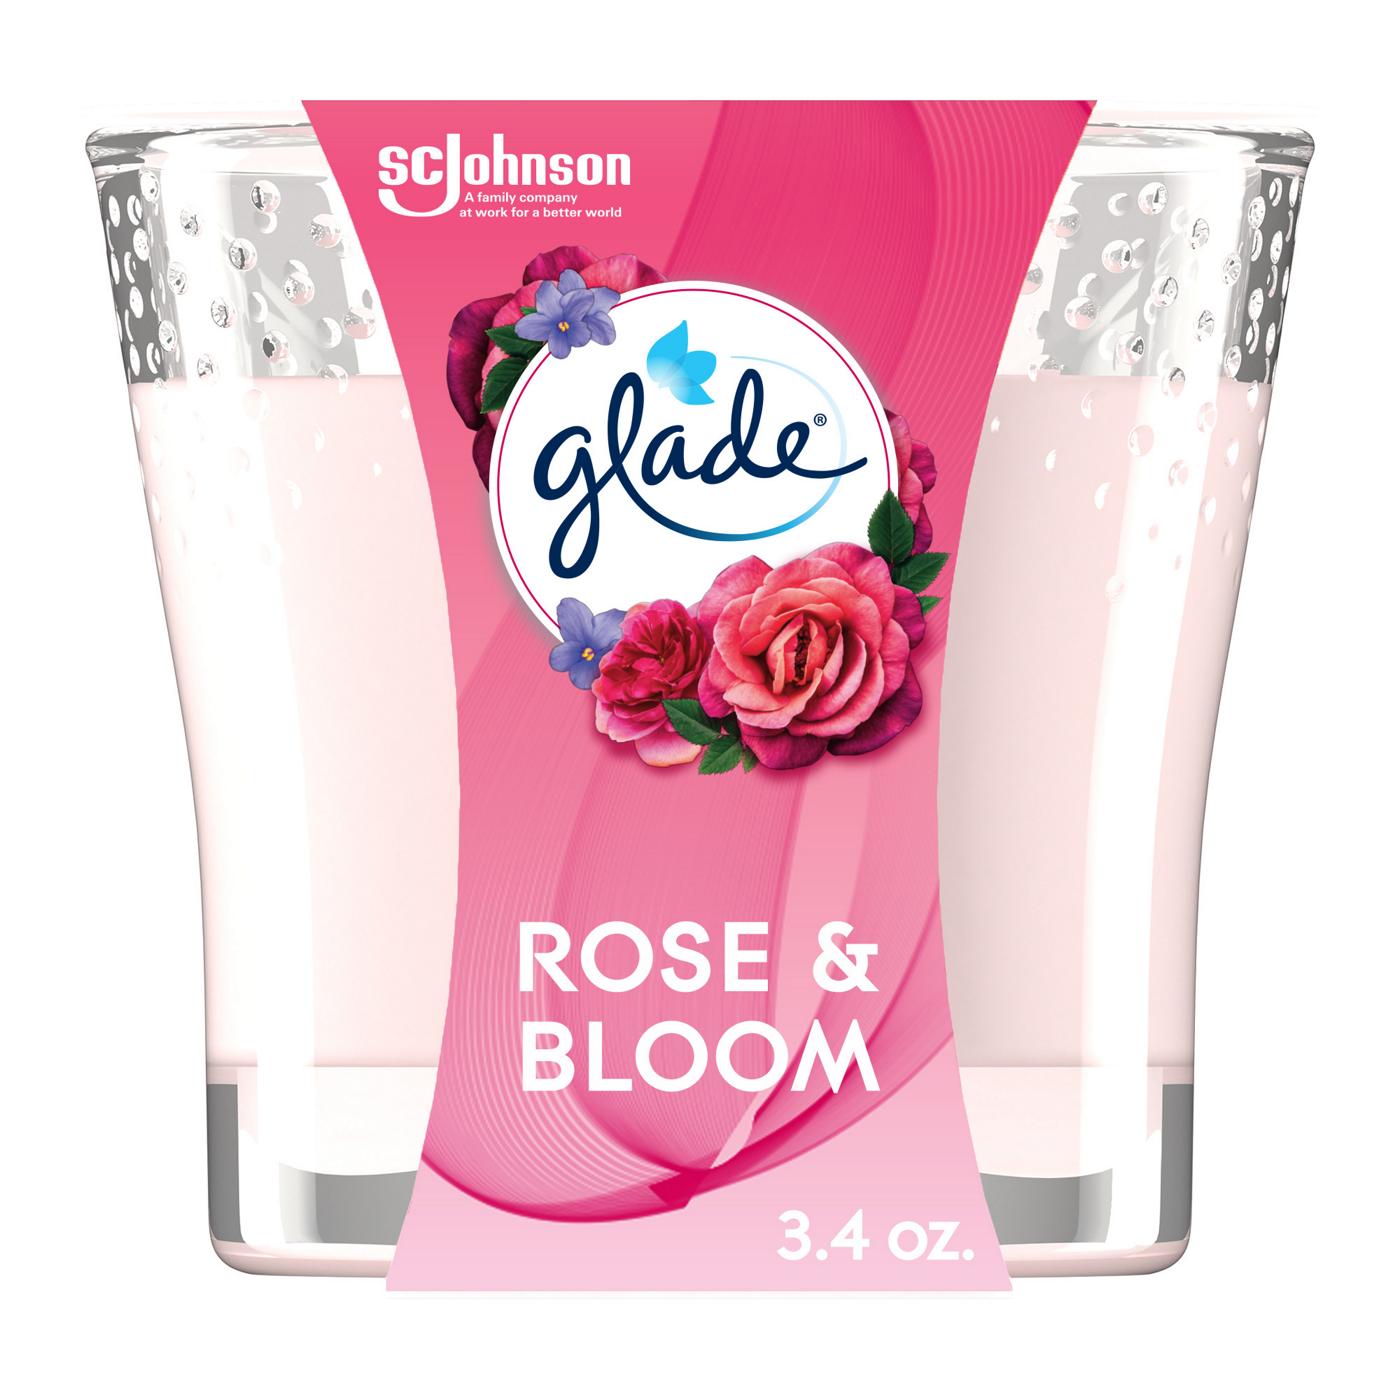 Glade Rose & Bloom Candle; image 2 of 3